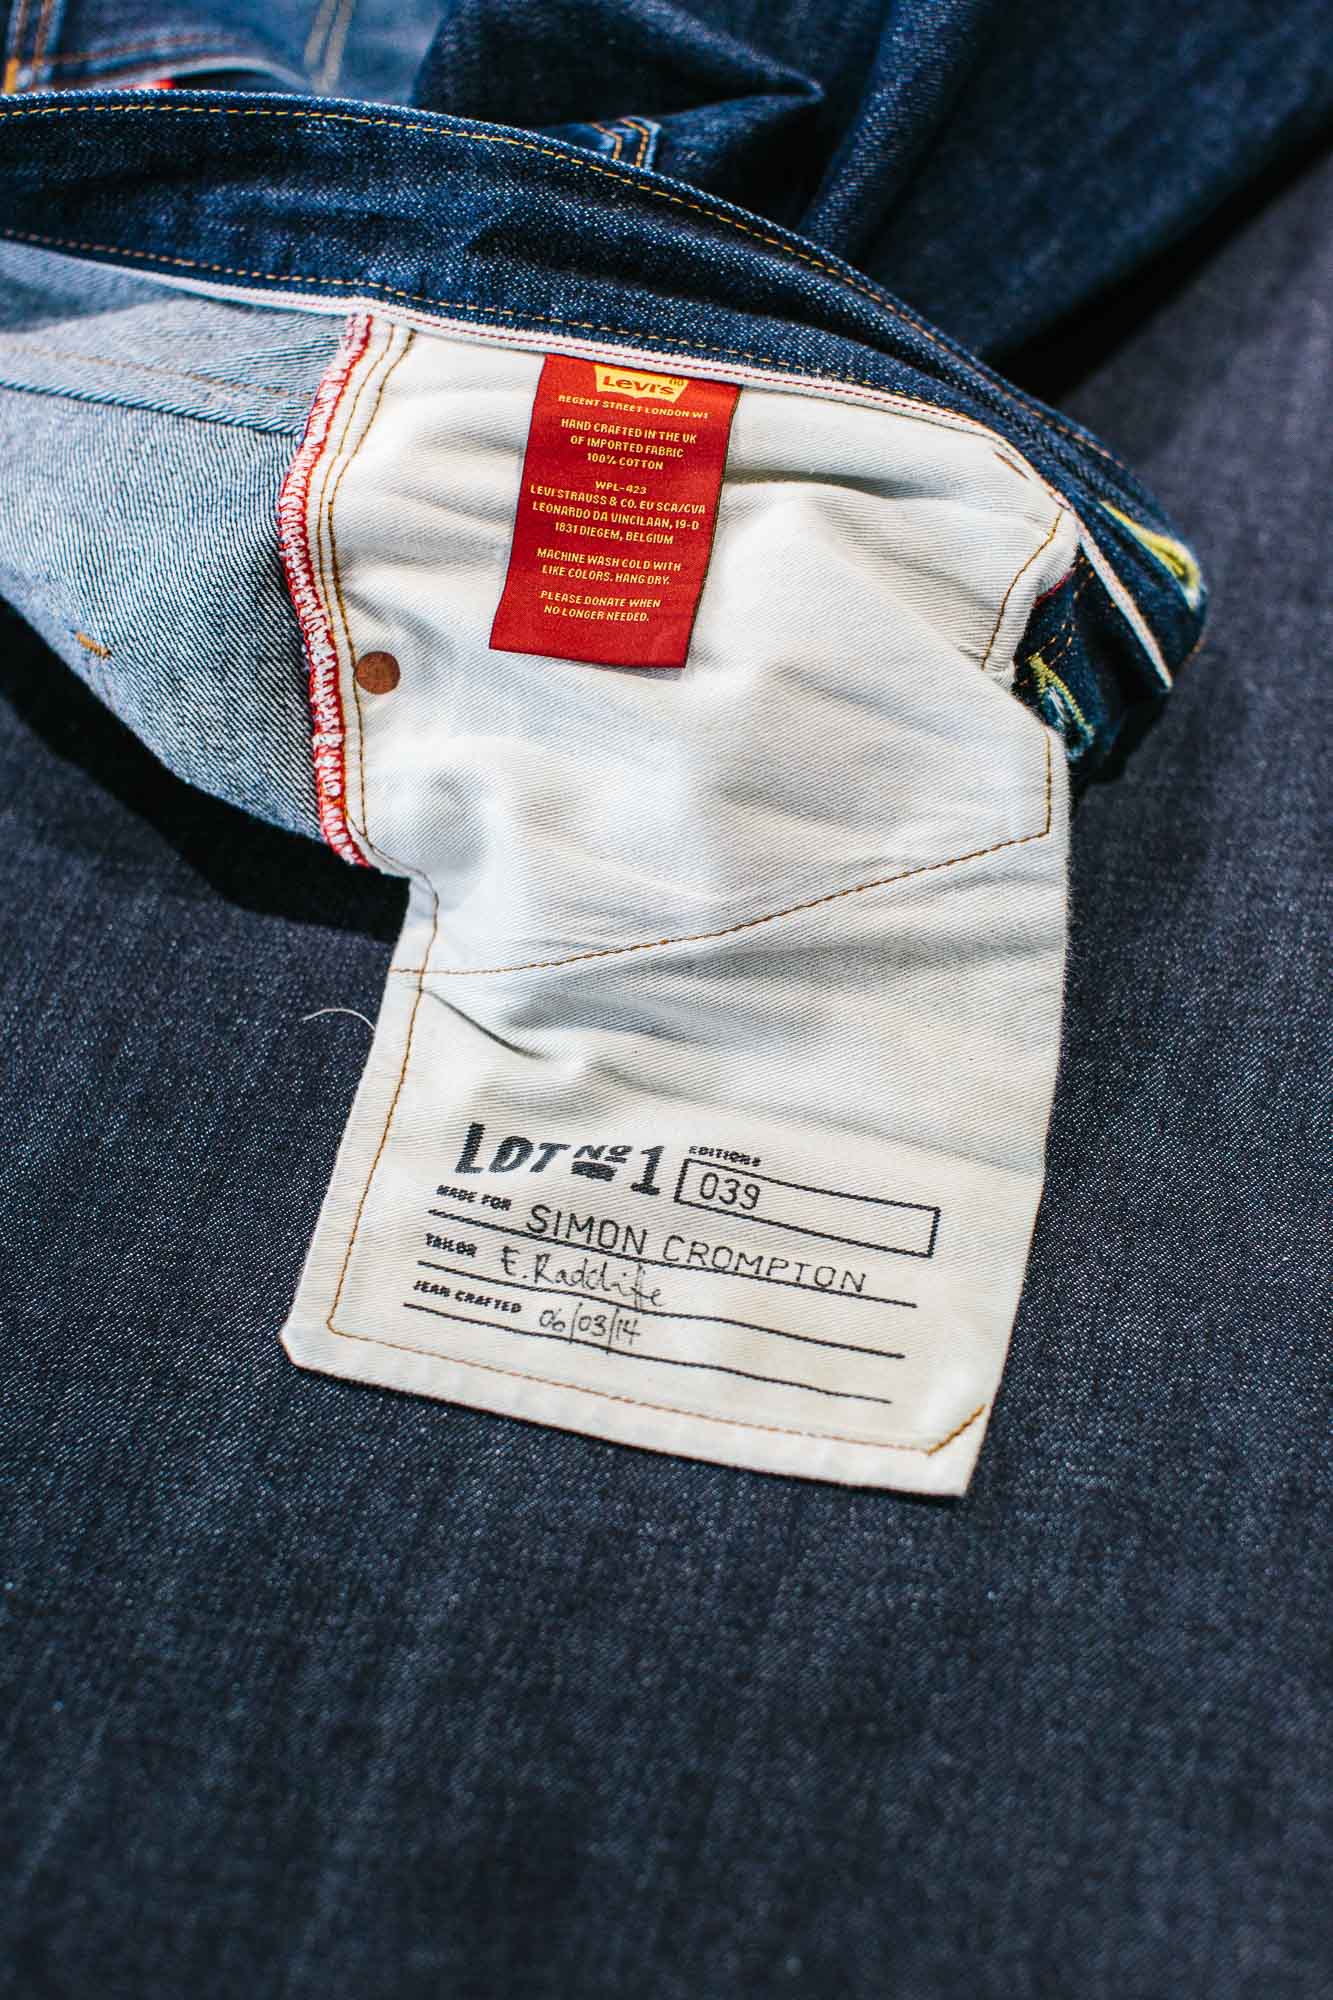 wash levi's before wearing